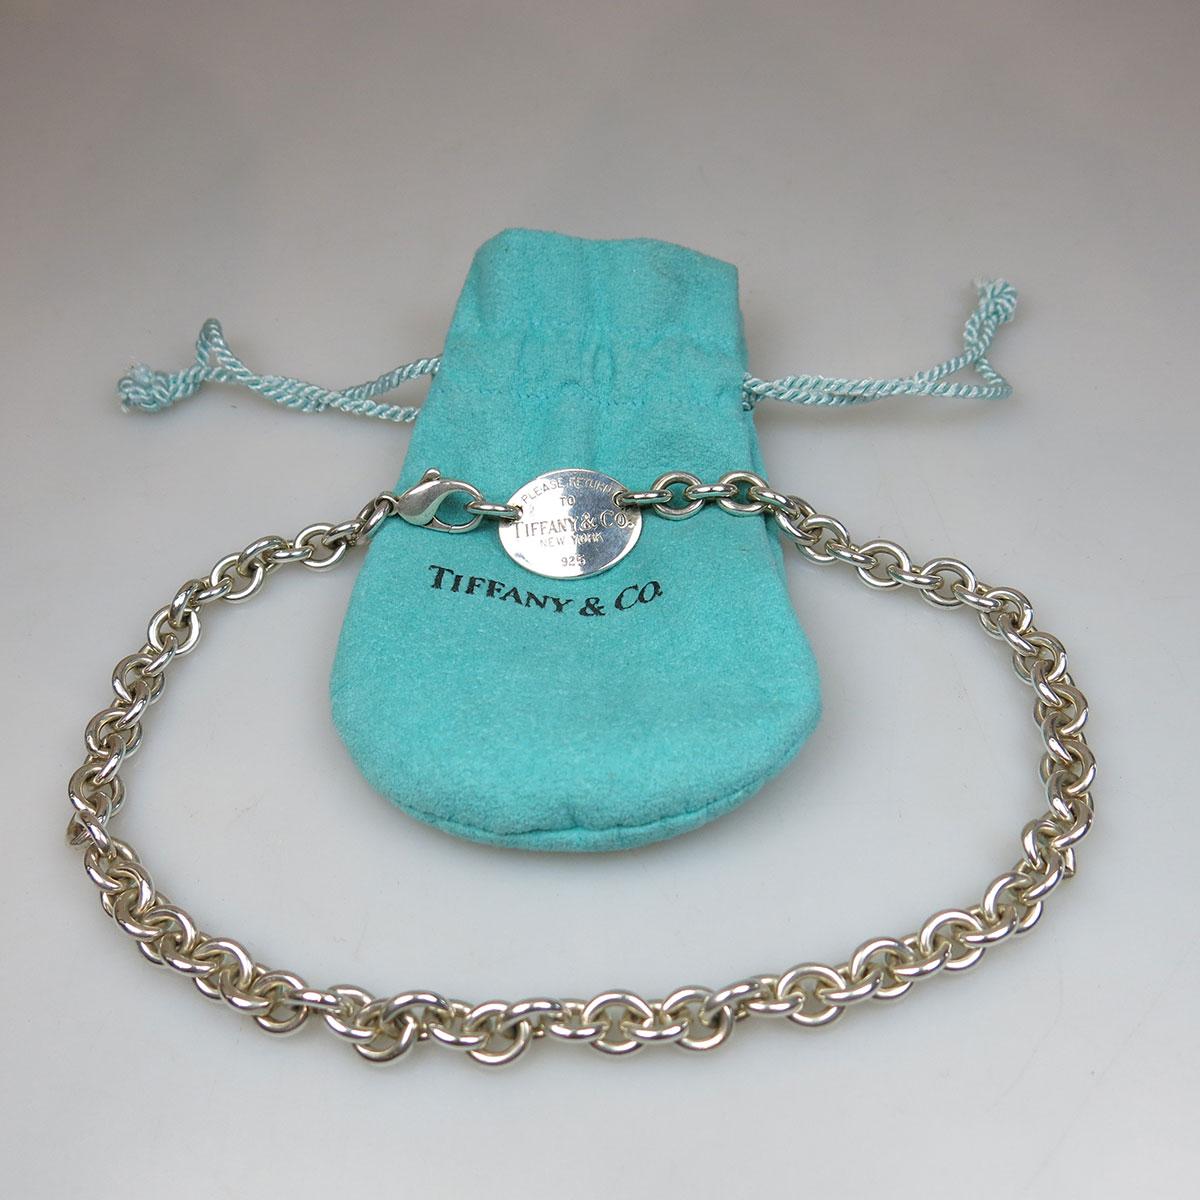 Tiffany & Co Sterling Silver Necklace; New York